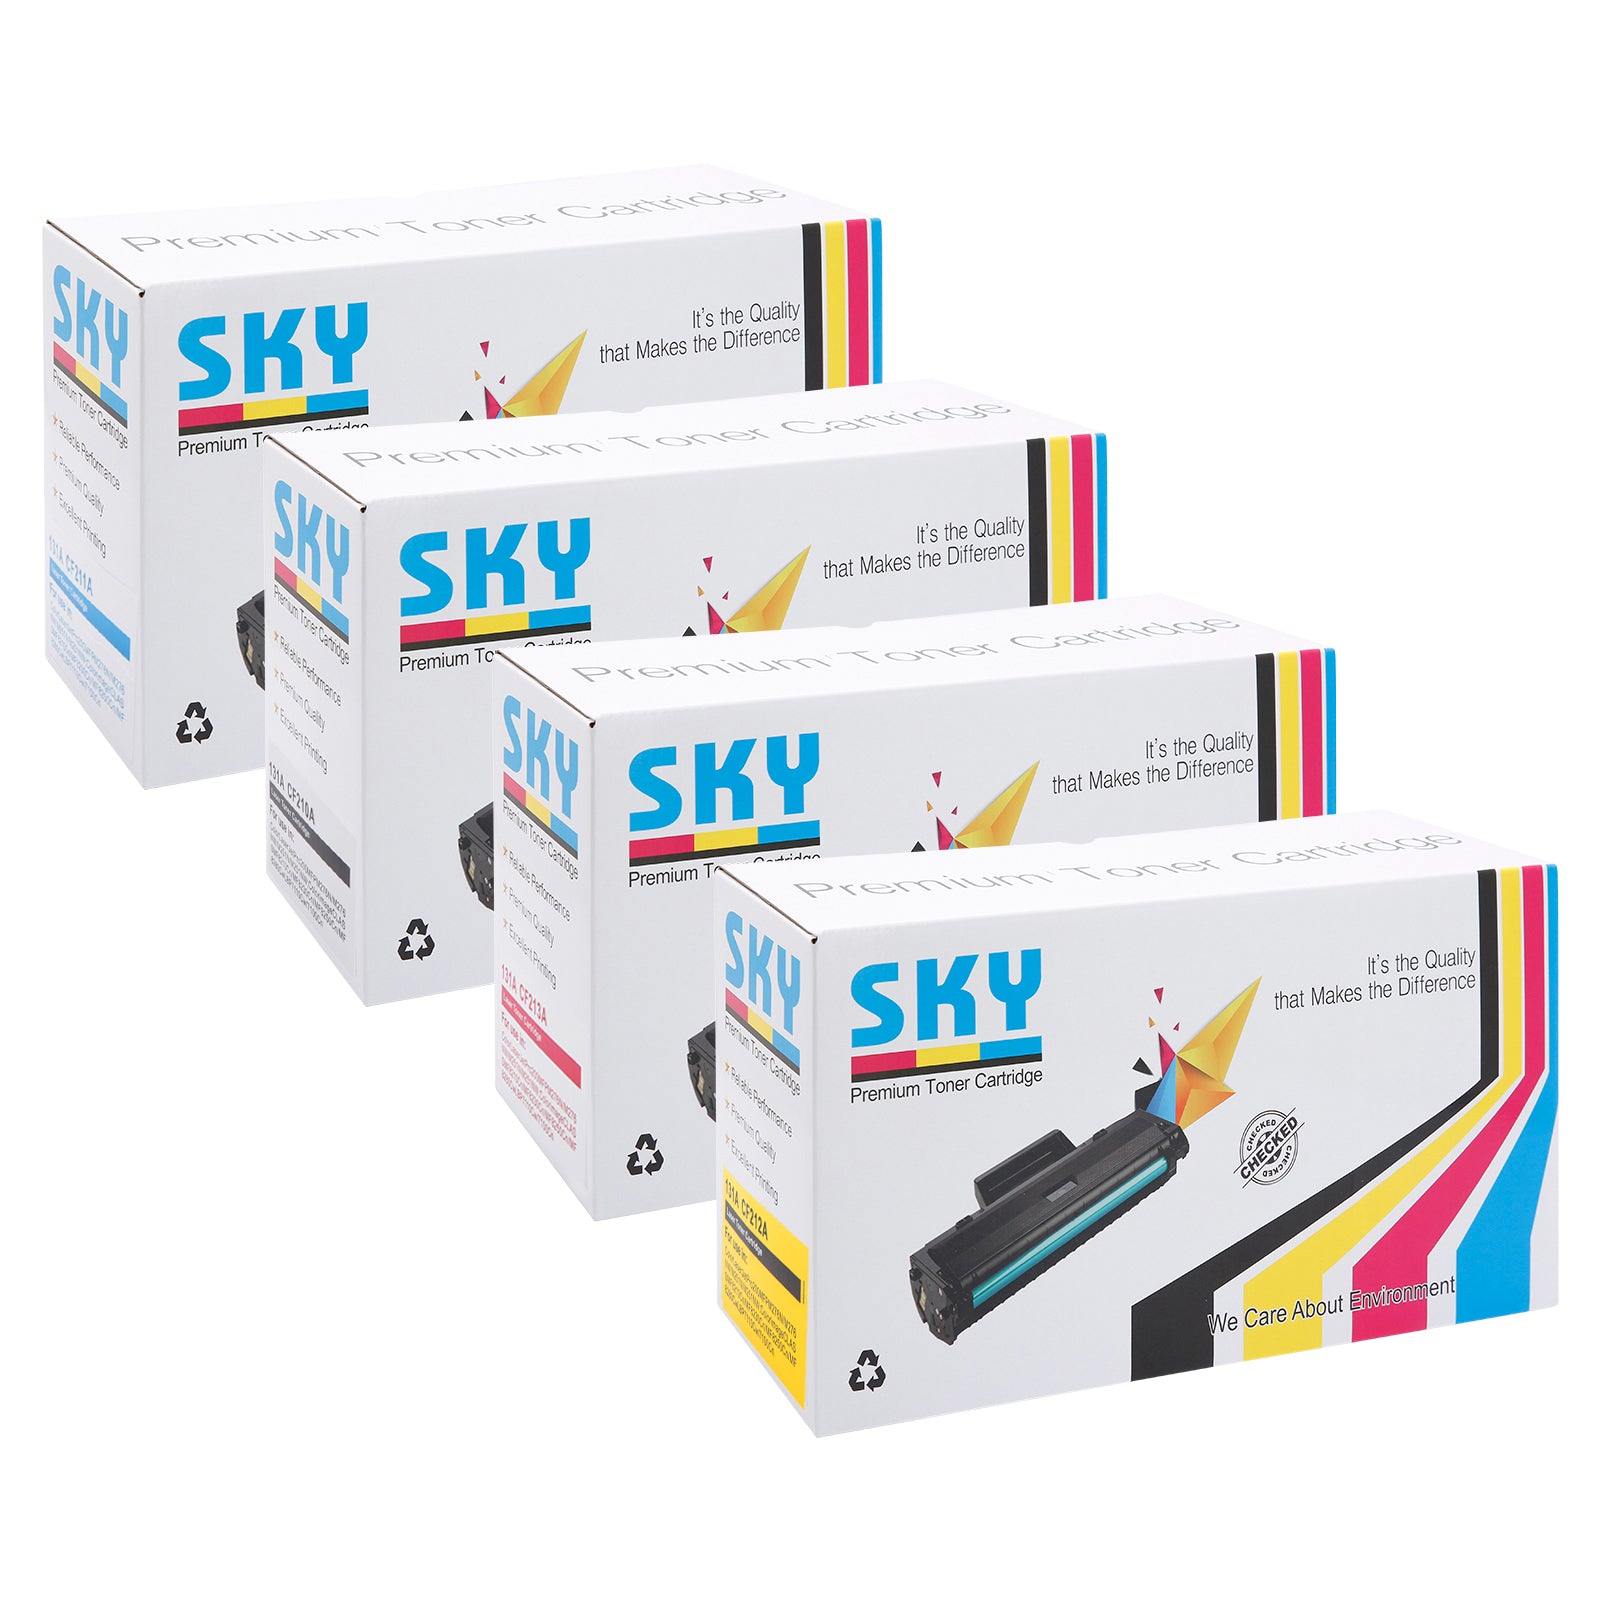 SKY 128A Compatible Toner Cartridge for CM1415 CP1522 CP125 Printers